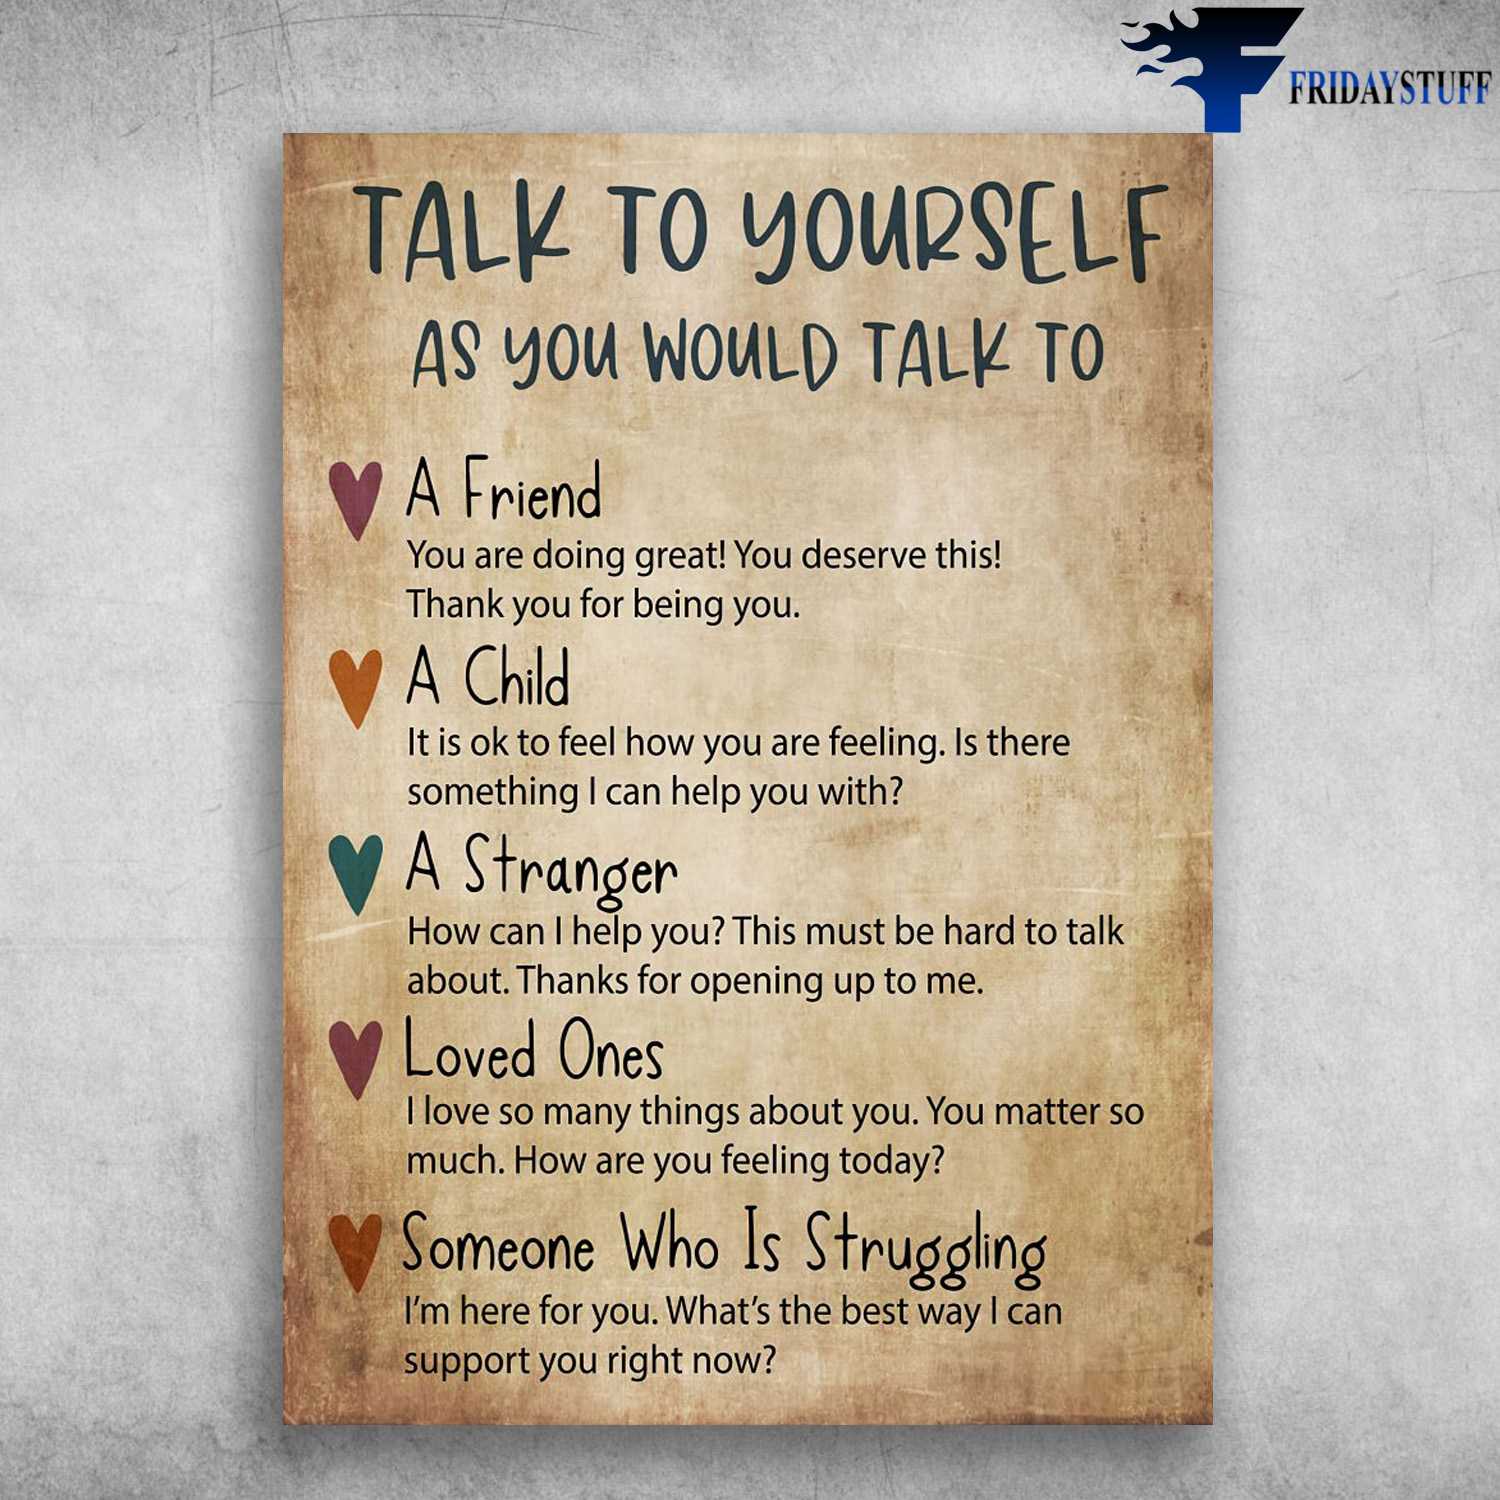 Social Worker - Talk To Yourself, As You Would Talk To A Friend, You Are Doing Great, You Deserve This, Thank You For Being You, A Child, It Is Ok To Feel How You Are Feeling